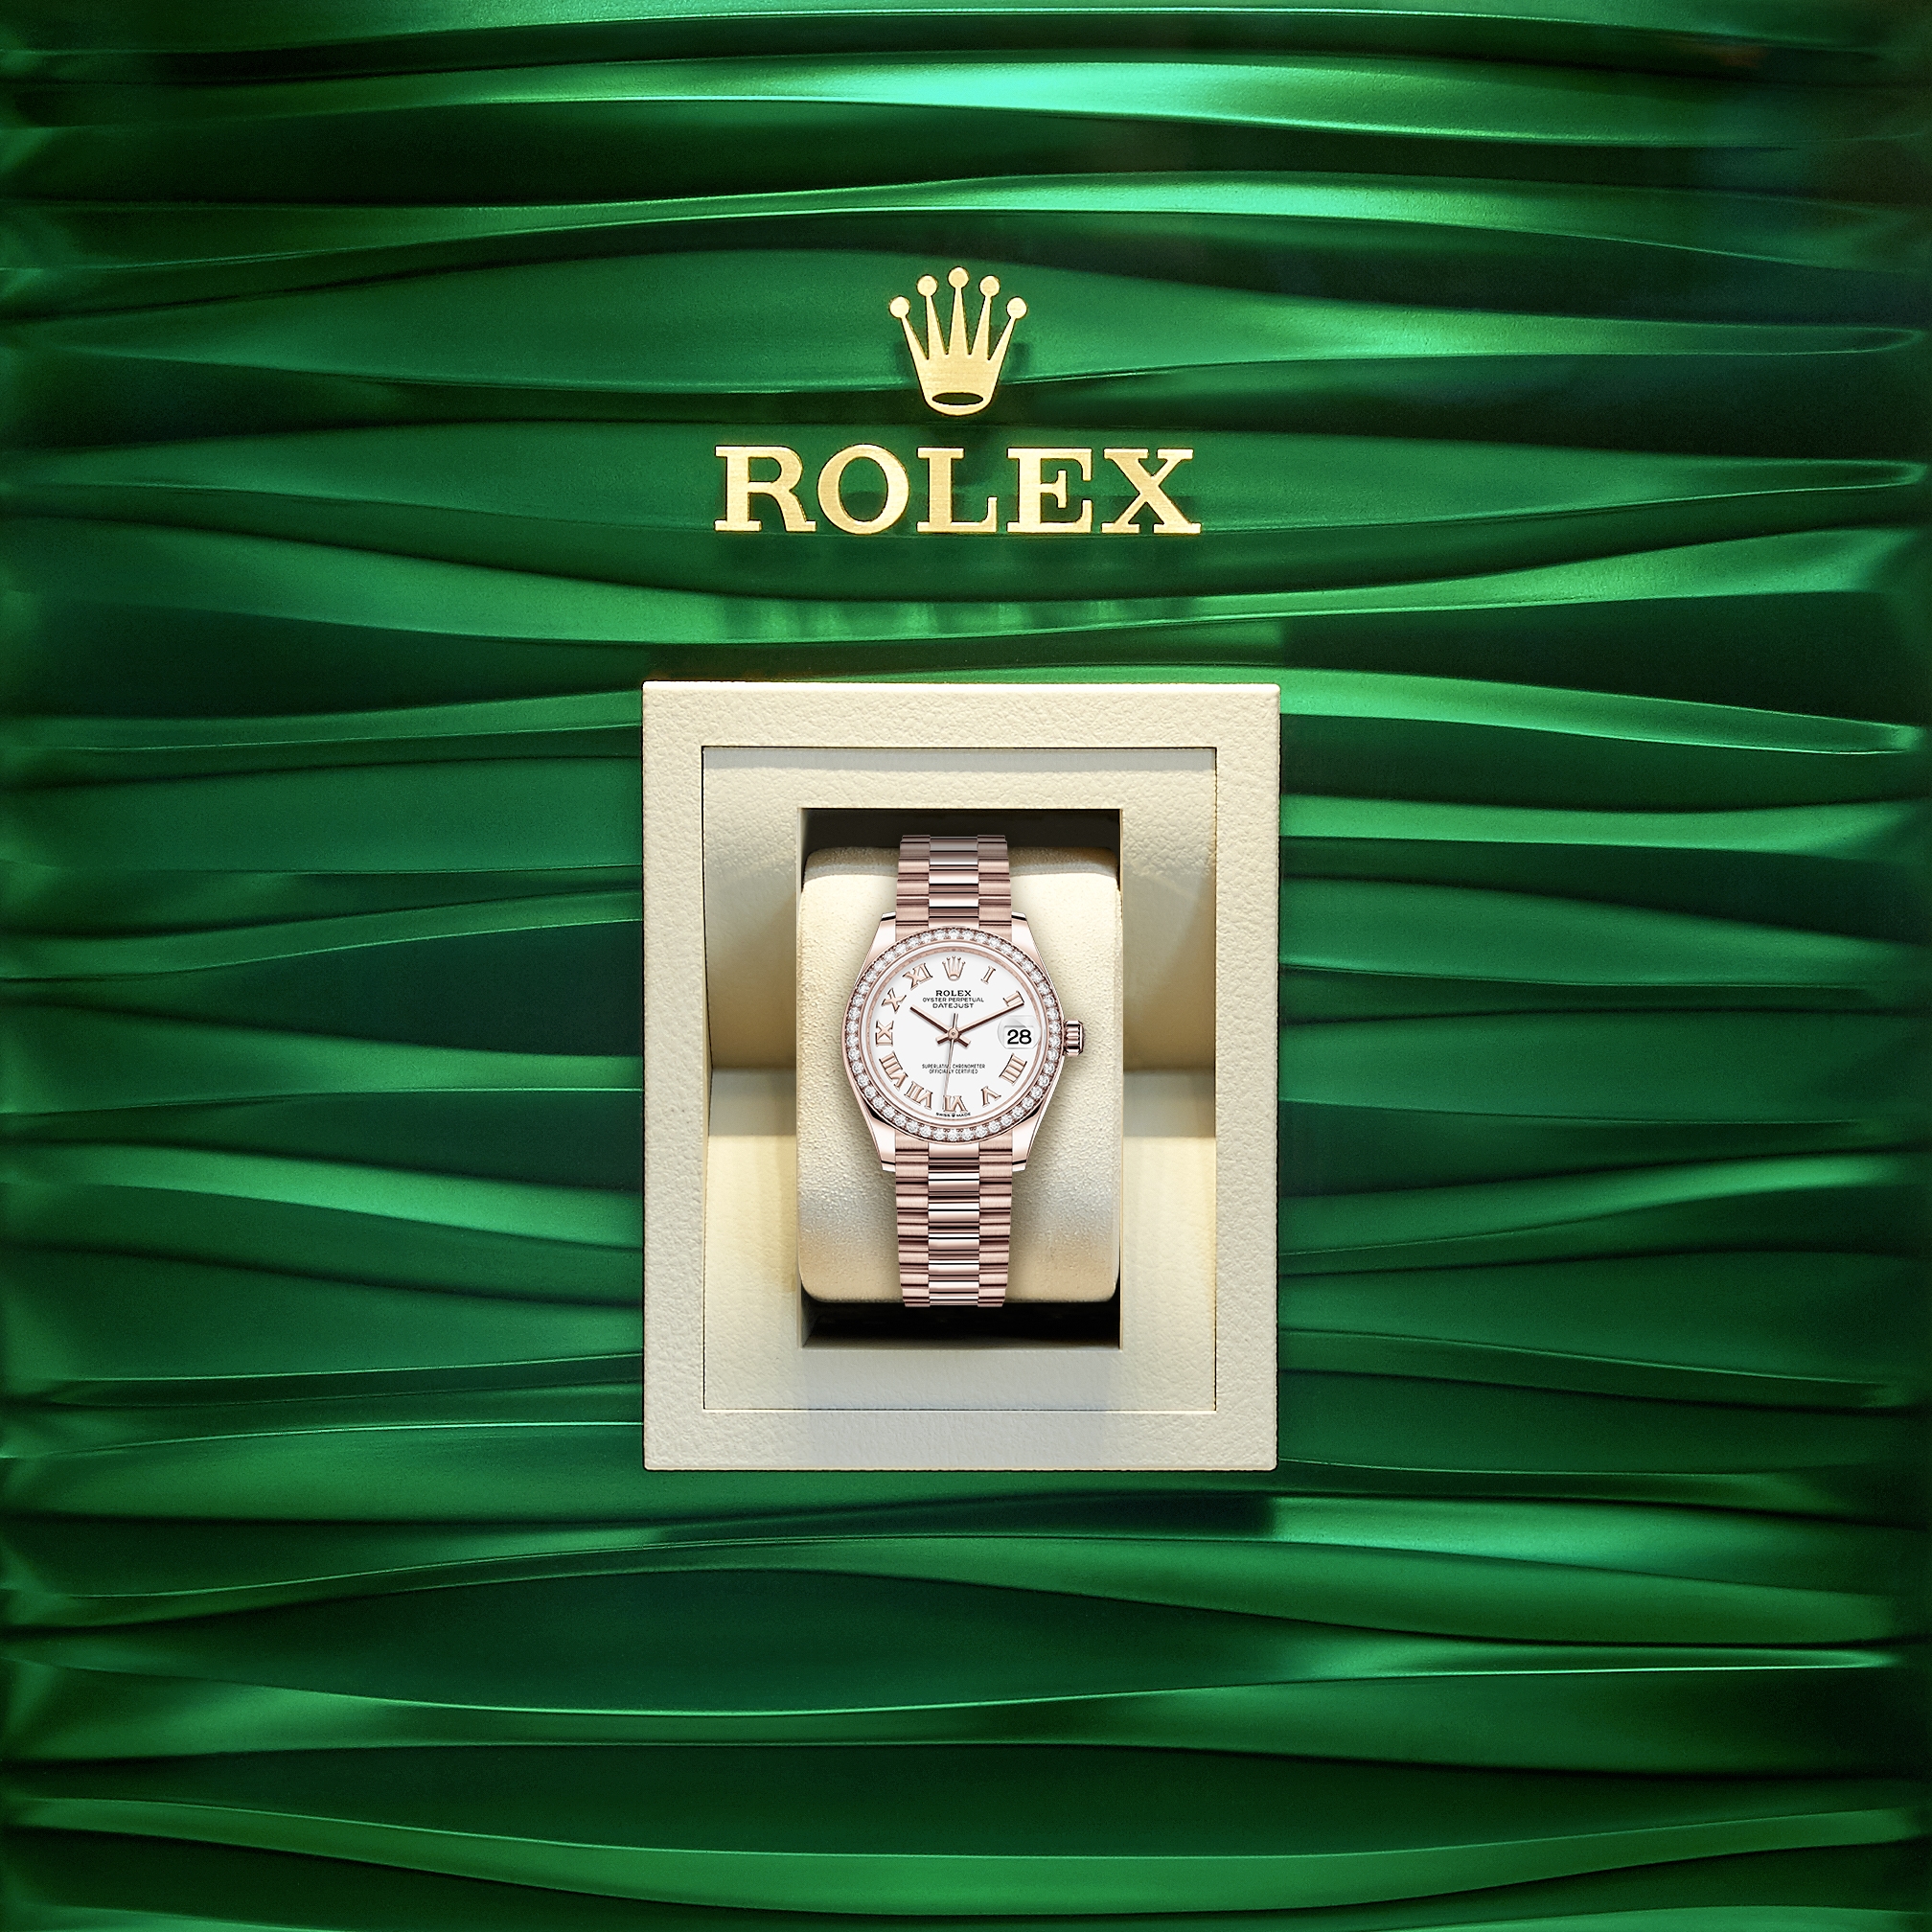 Rolex Oyster Perpetual 18K Yellow Gold White Dial Watch